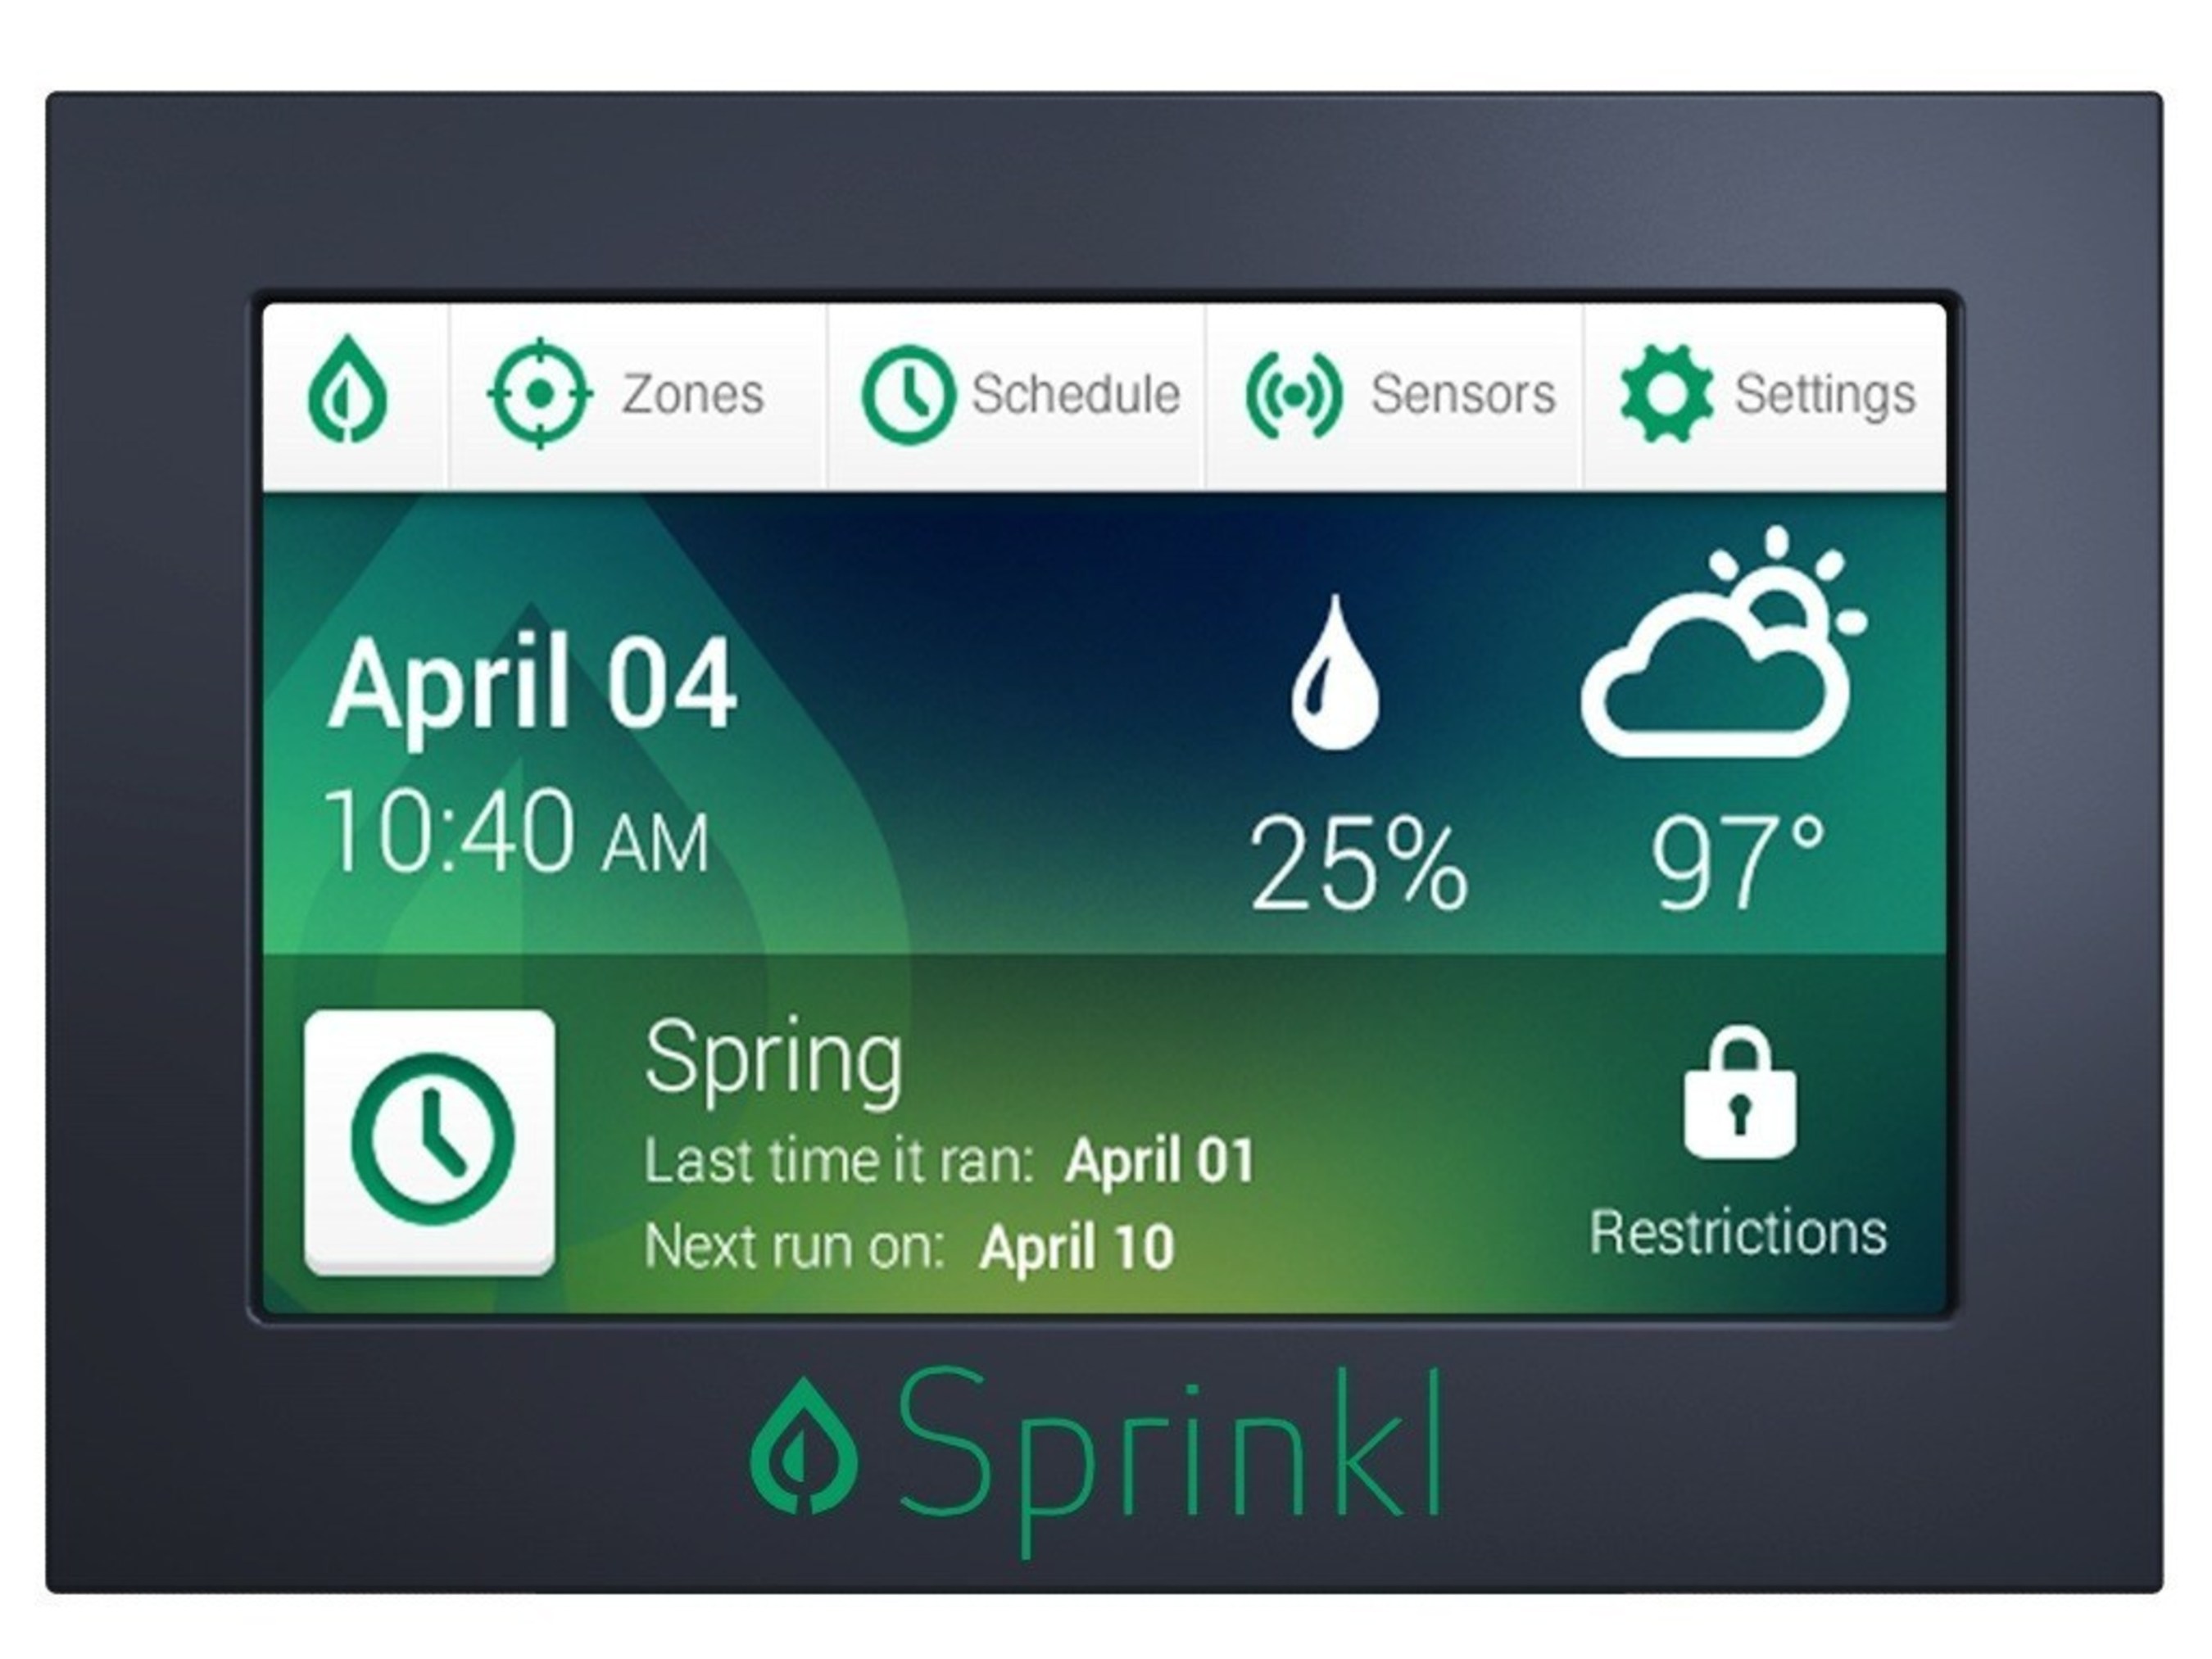 Using a patent pending wireless mesh network of ground sensors, Sprinkl's next generation irrigation controller knows how much water is needed for lawns.